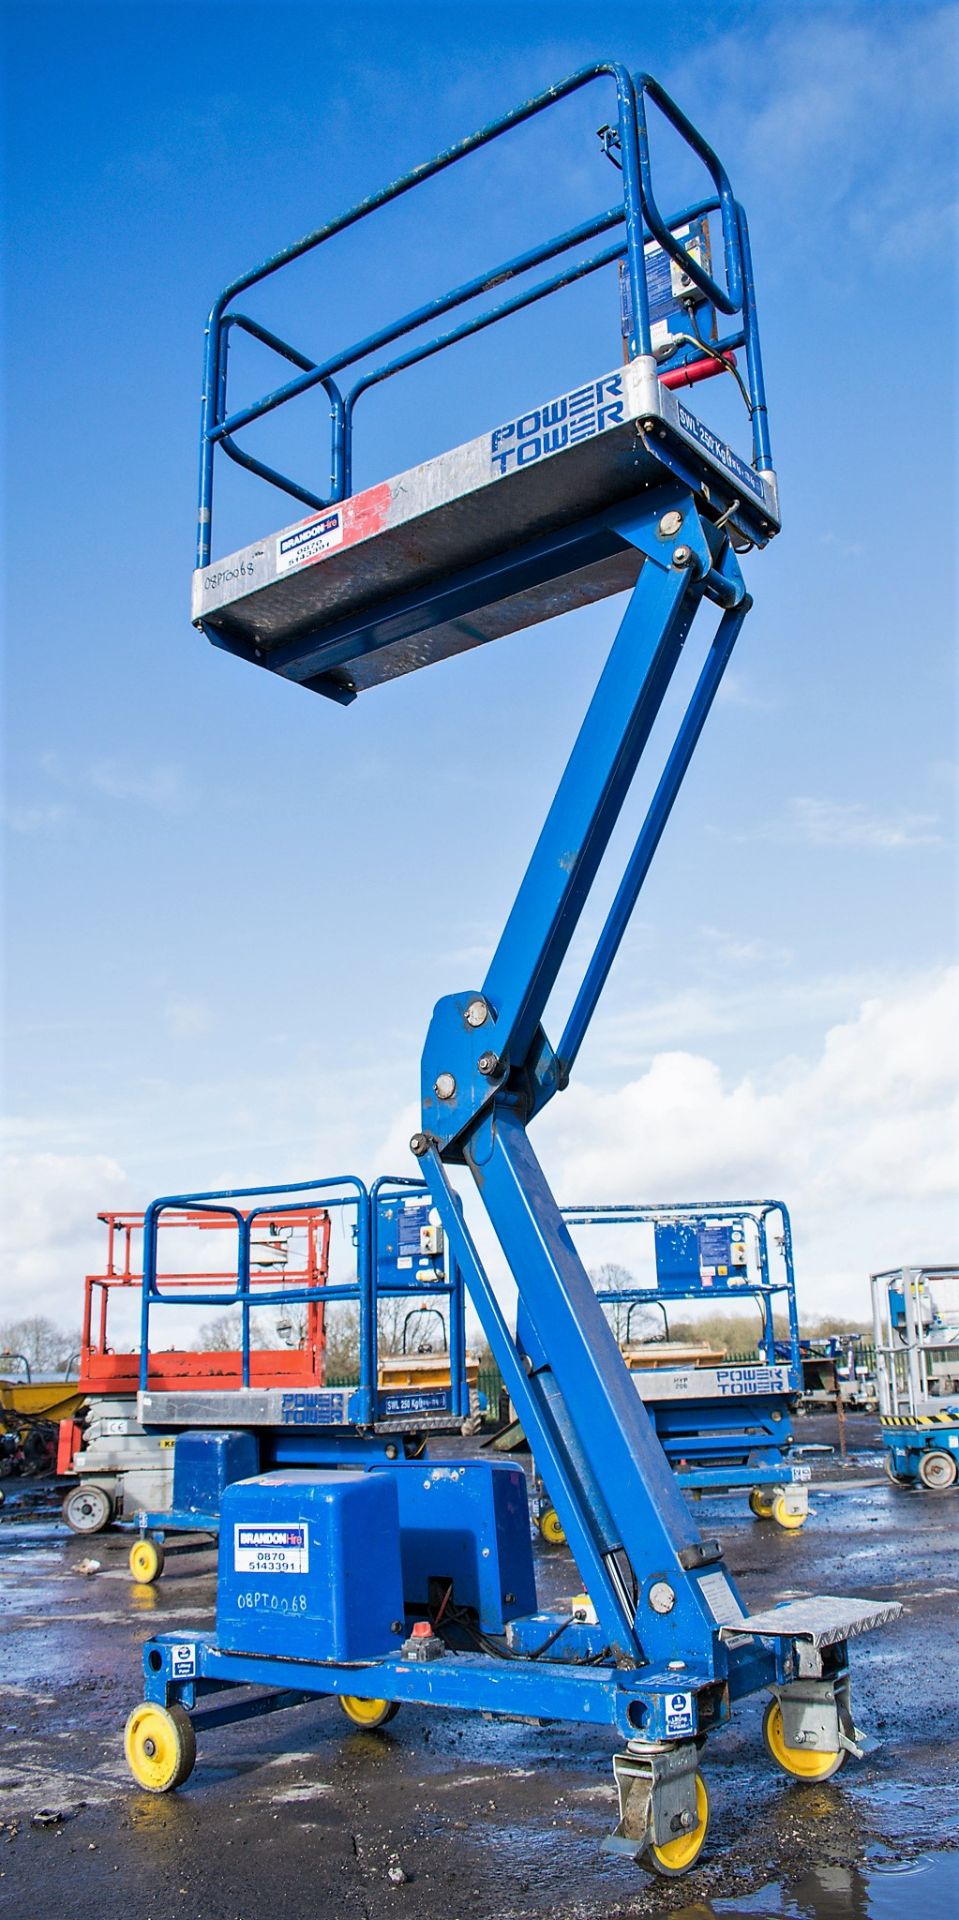 Power Tower battery electric scissor lift 08PT0068 - Image 5 of 5